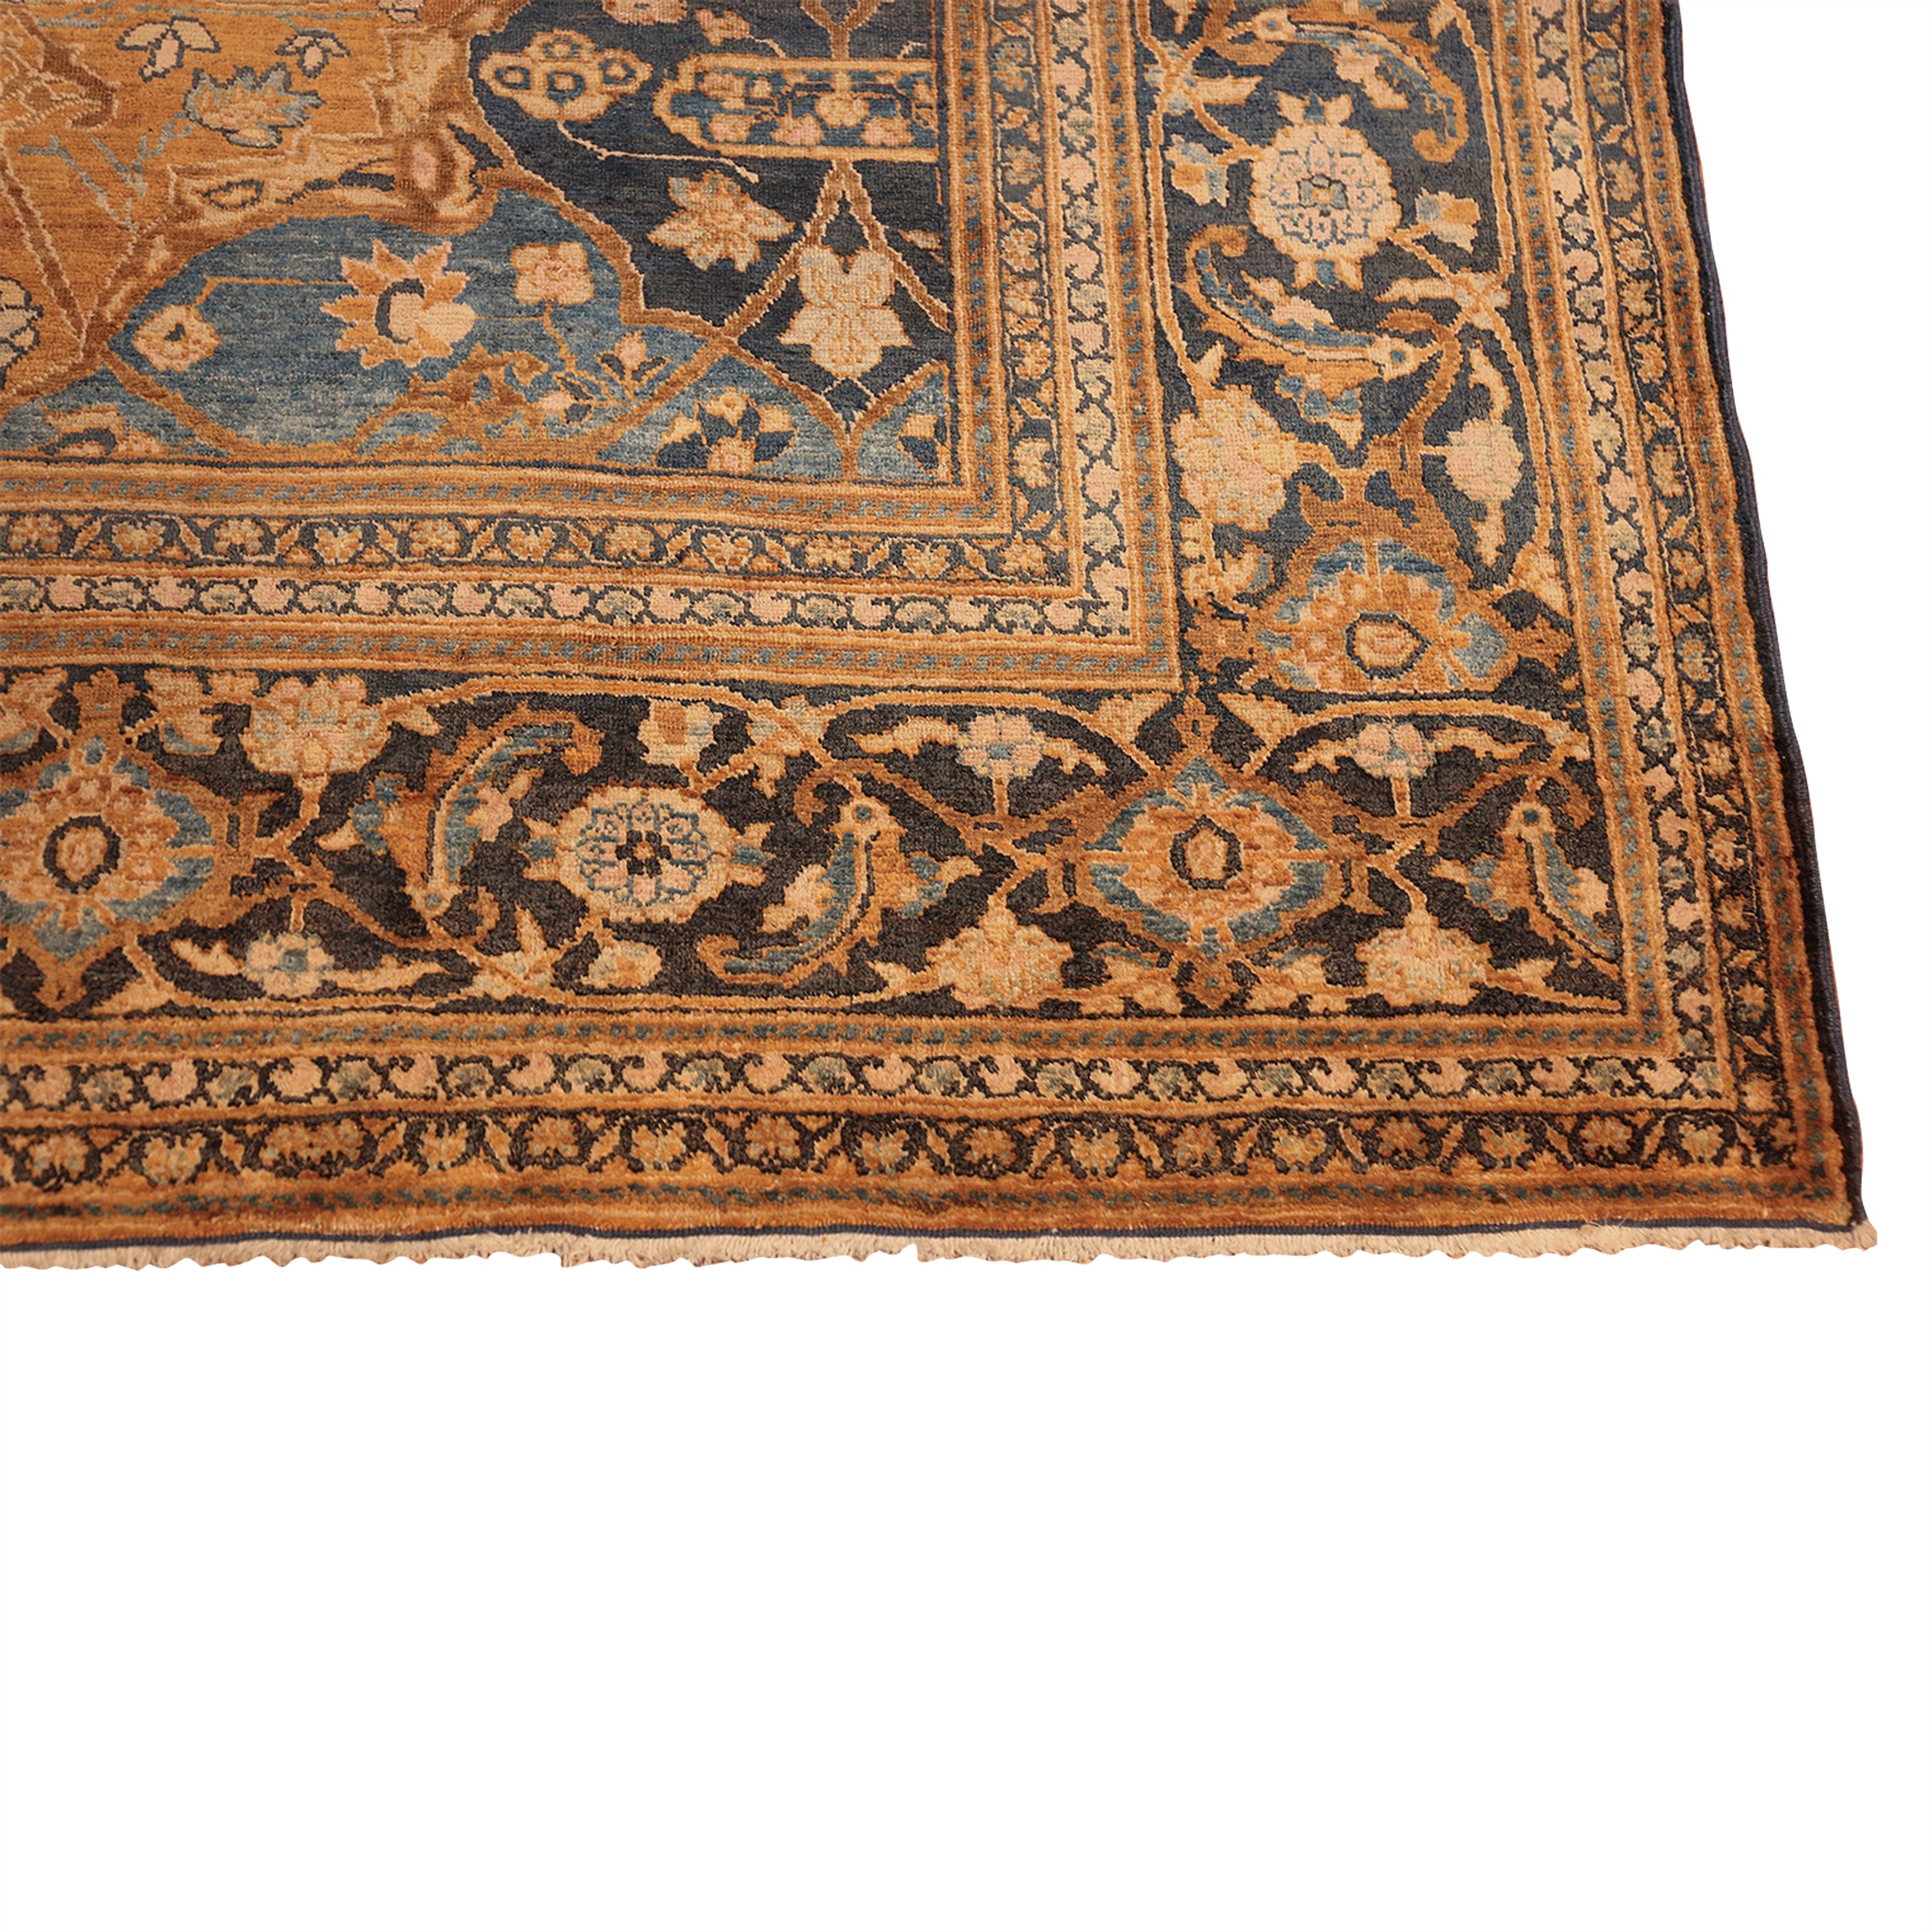 Brown Antique Traditional Persian Khorassan Rug - 9' x 12'5"